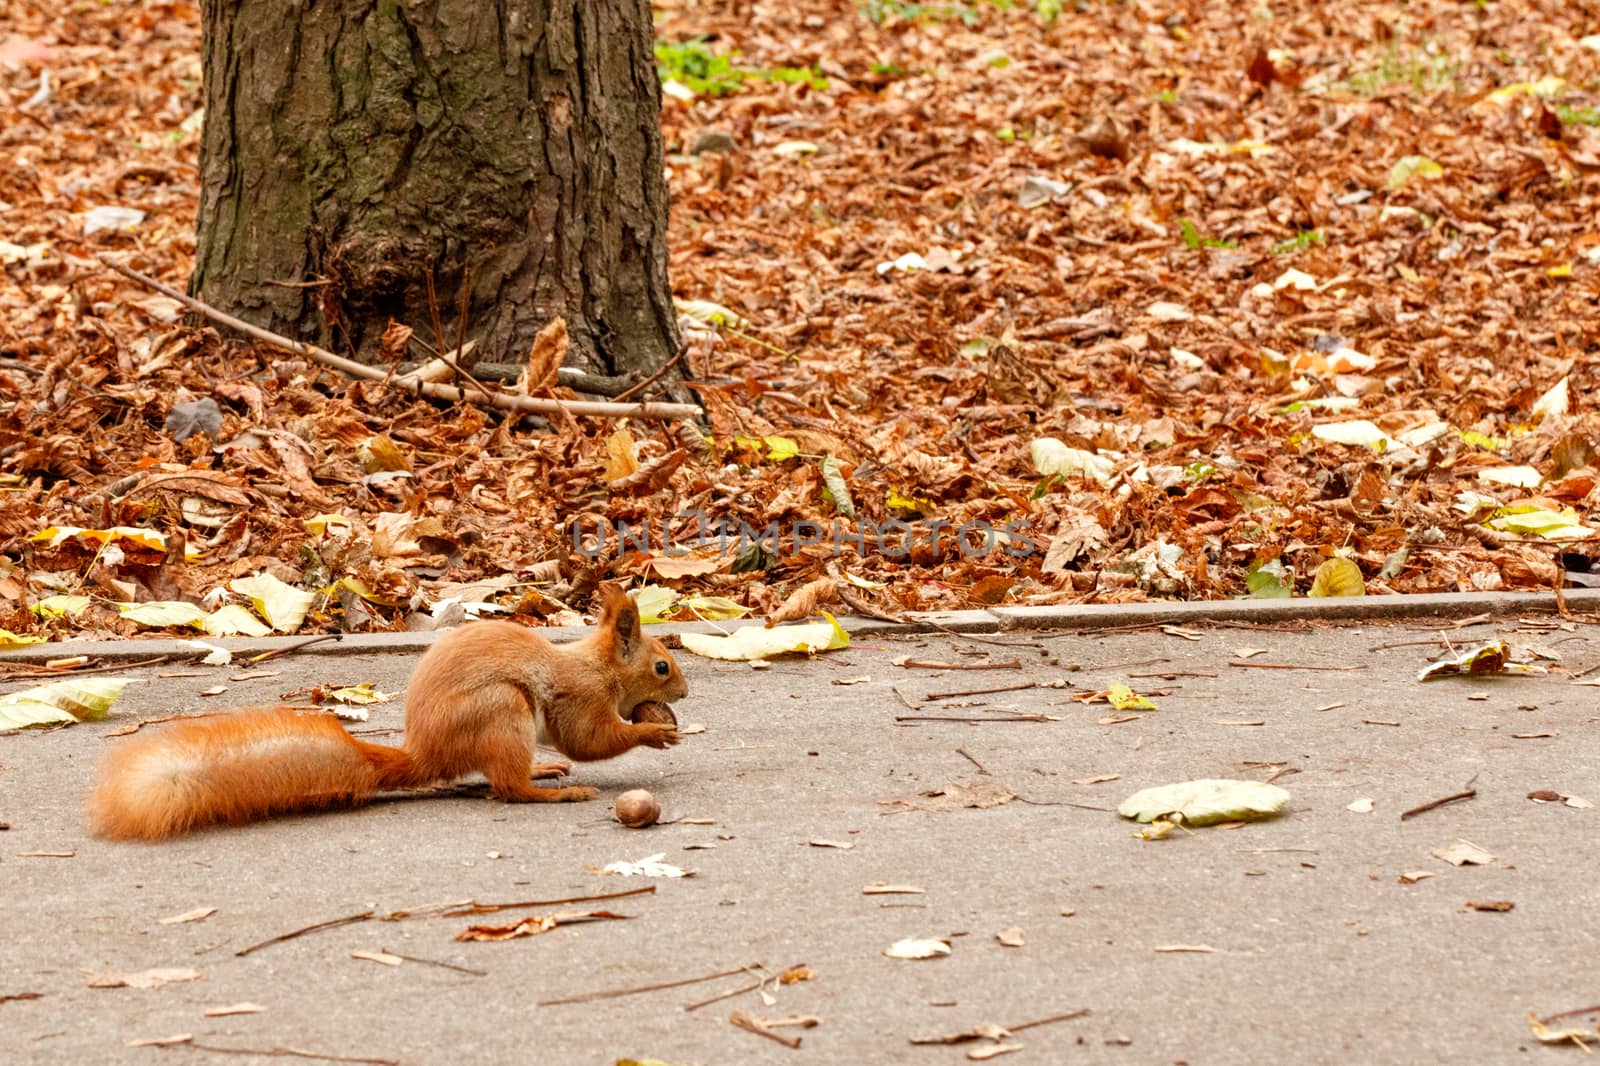 A fluffy orange squirrel found a walnut that it holds in its paws and nibbles on an autumn asphalt path in an autumn park. Close-up image with copy space.